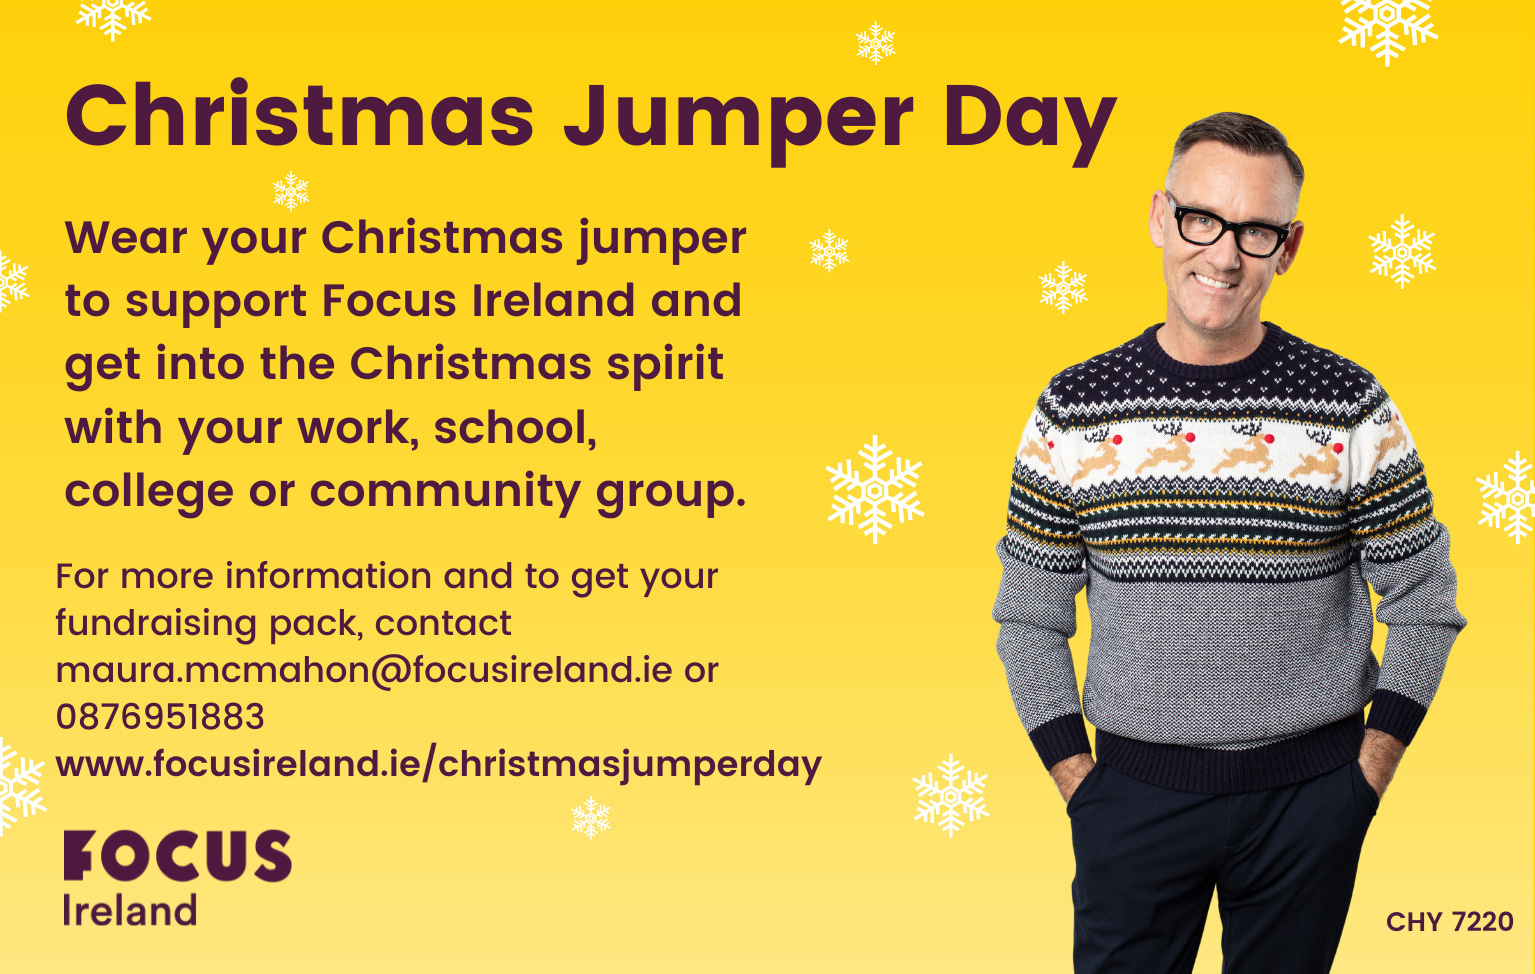 Focus Ireland Christmas Jumper Day will help raise much-needed funds for the charity.